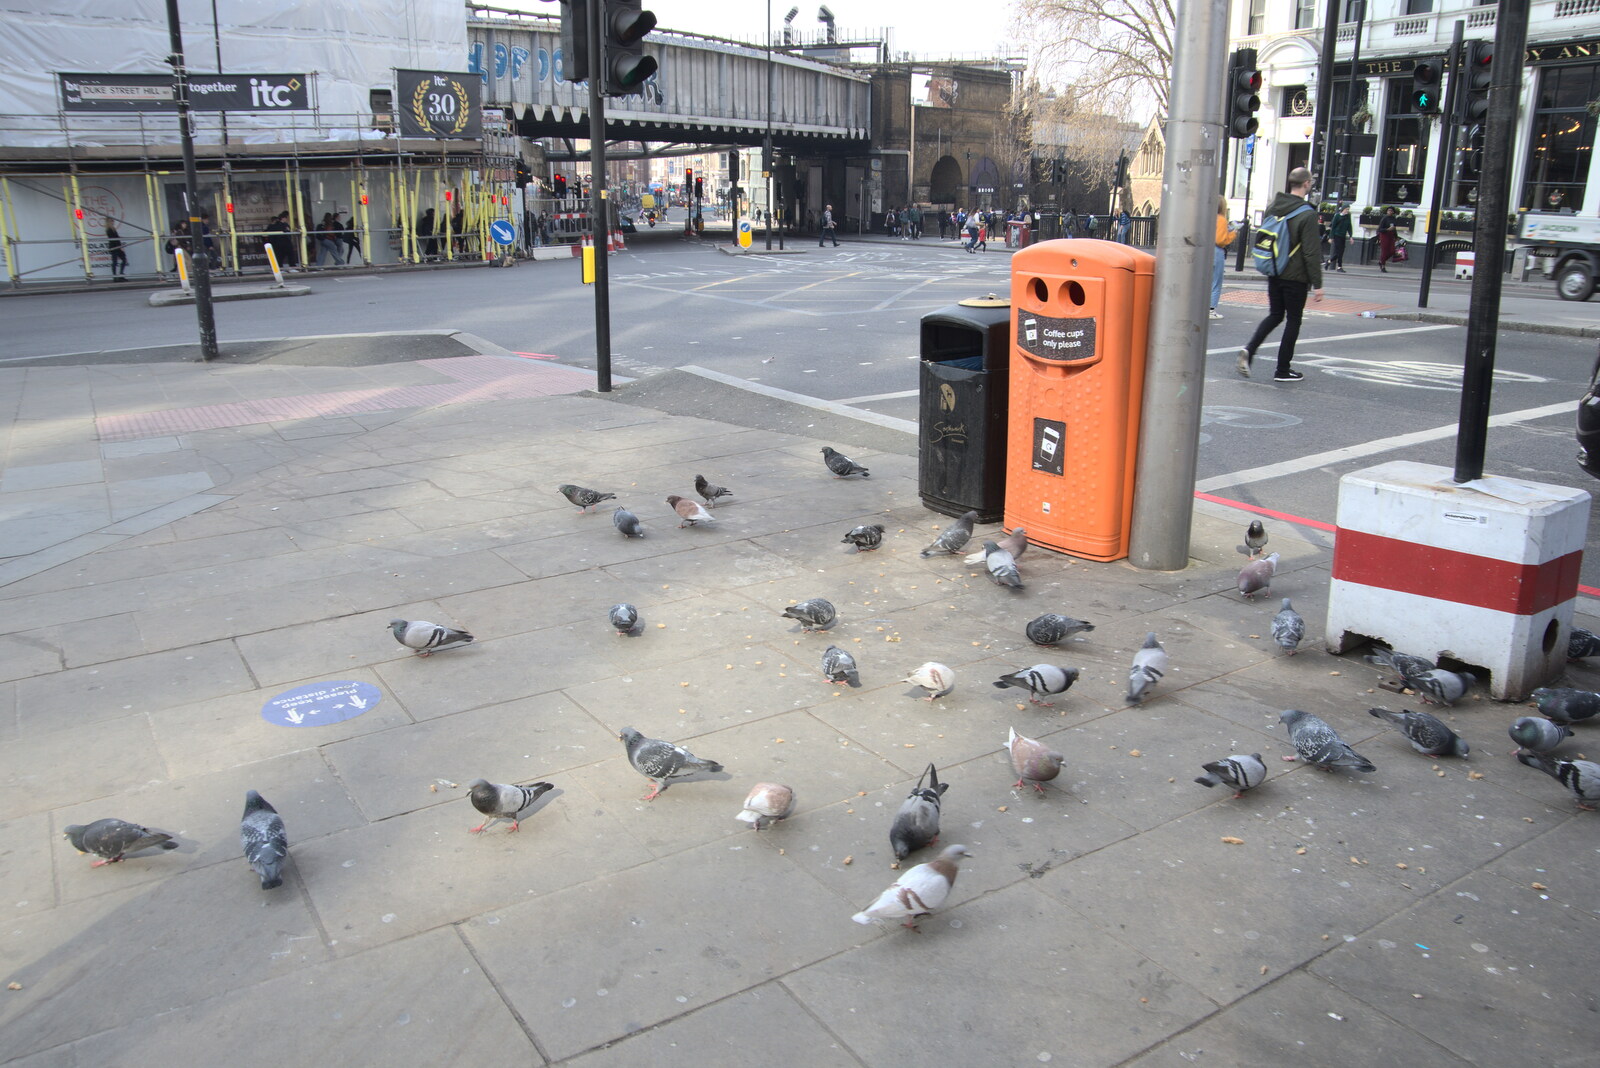 A Walk Around the South Bank, London - 25th March 2022: Pigeon action on London Bridge 